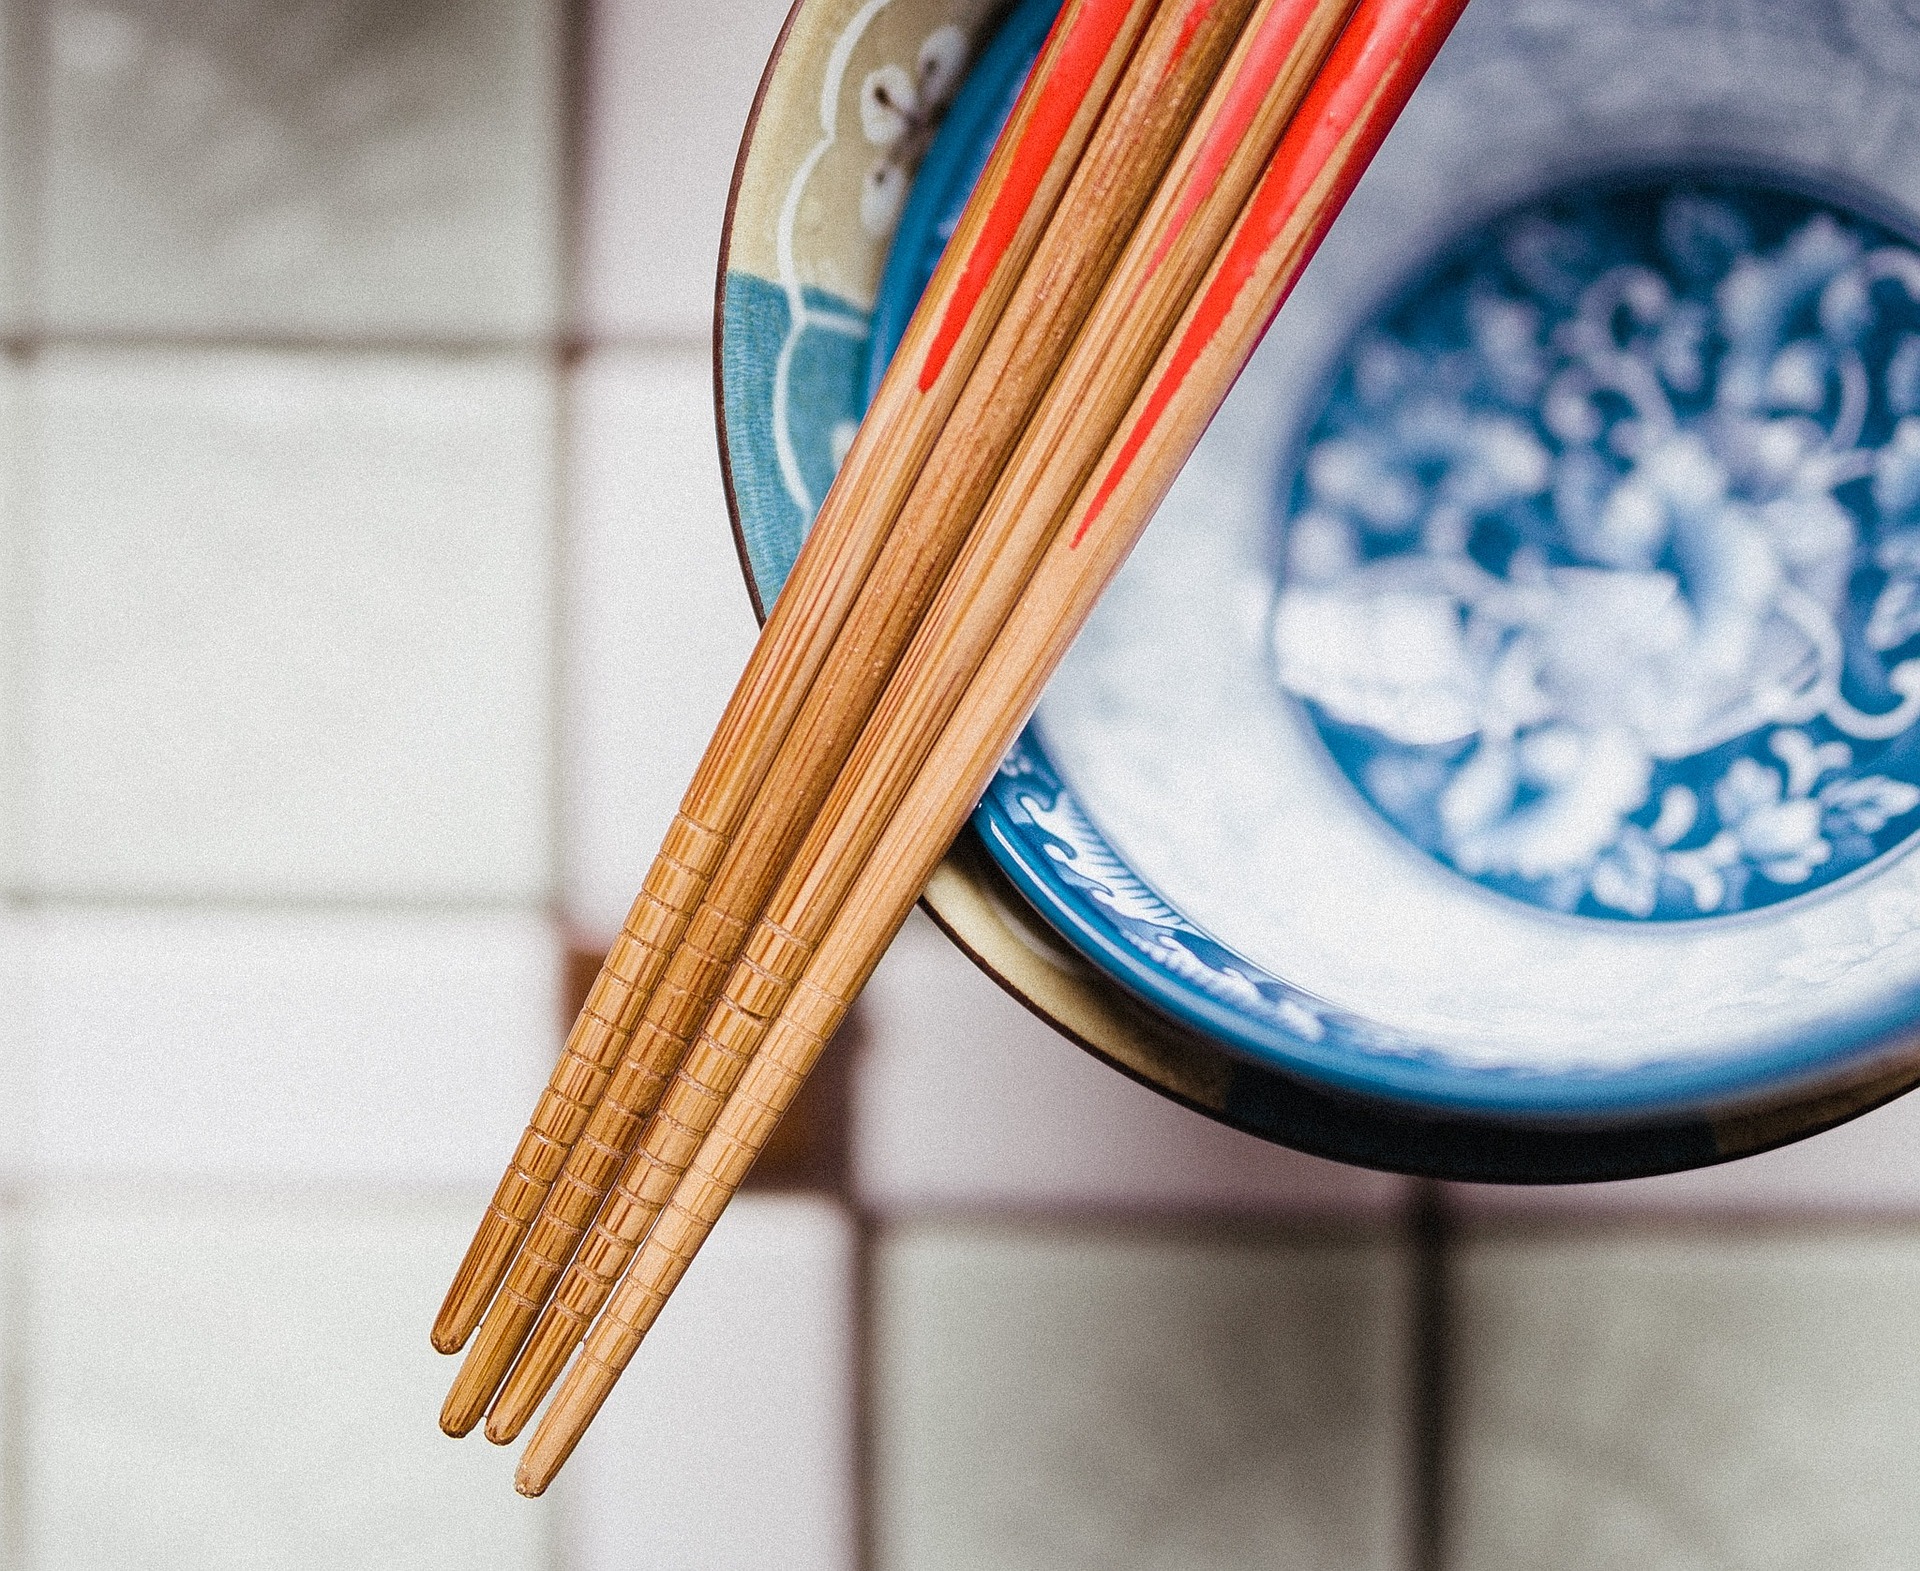 Chopsticks. Kitchen and eating utensils primarily used in East Asia for 3 millennia 